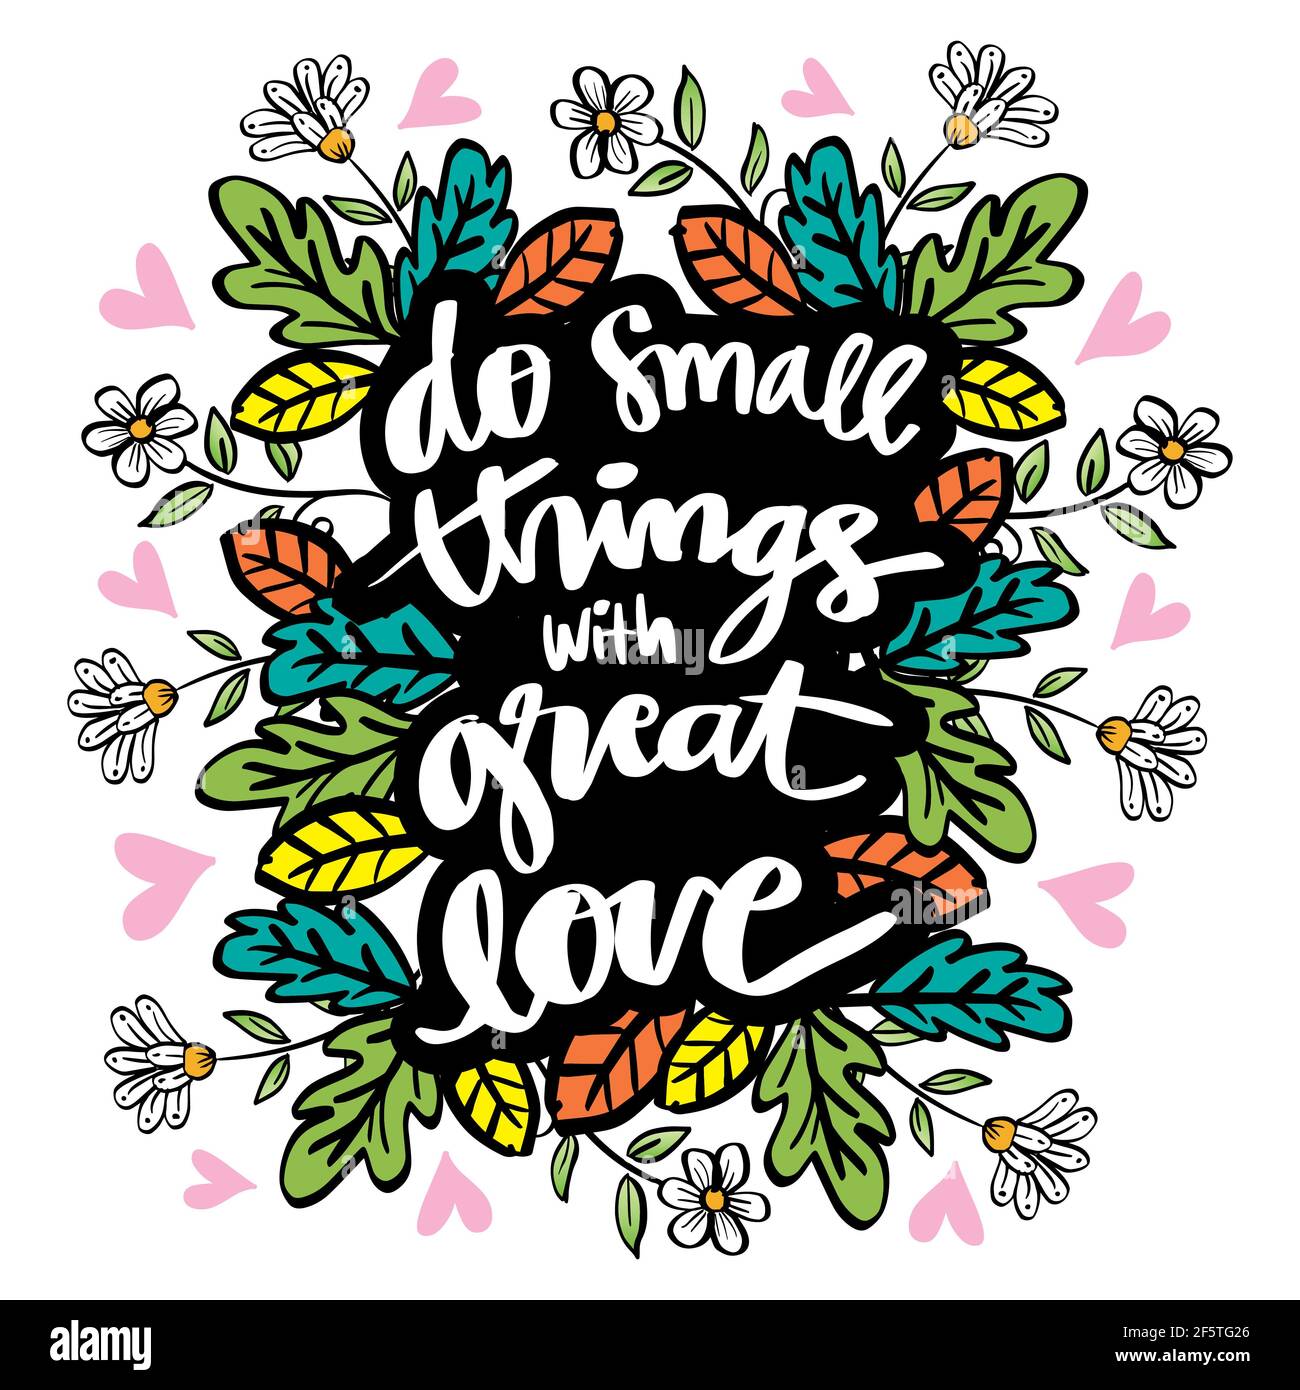 Do small things with great love. Motivational quote Stock Photo ...